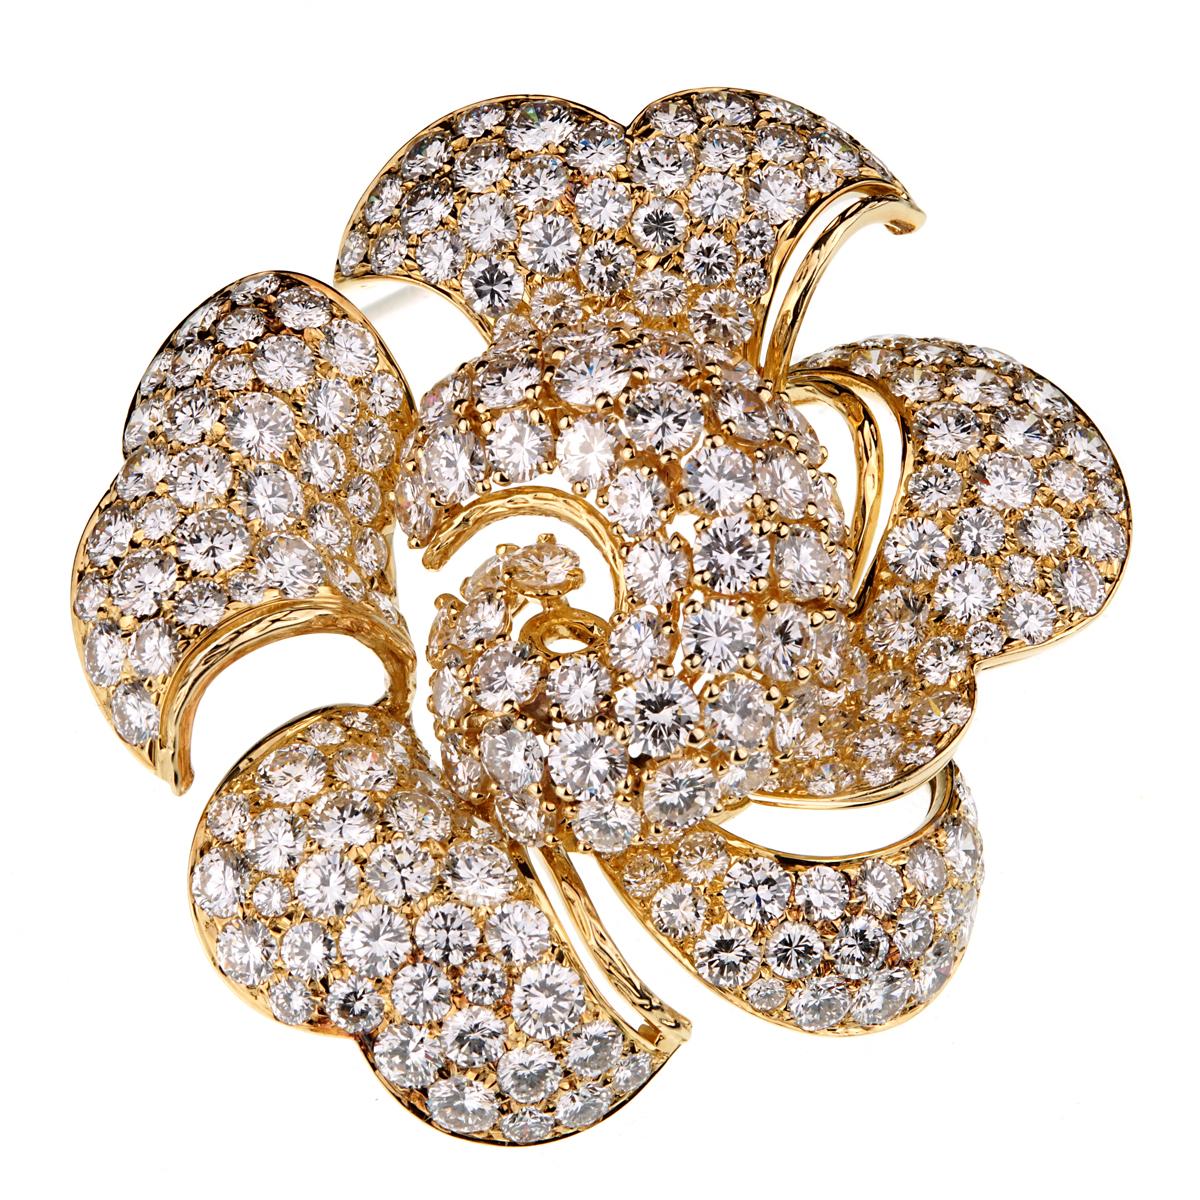 Round Cut Bulgari Vintage Bring Back The Brooch 34 Carat Pave Diamond Gold Floral Brooch For Sale